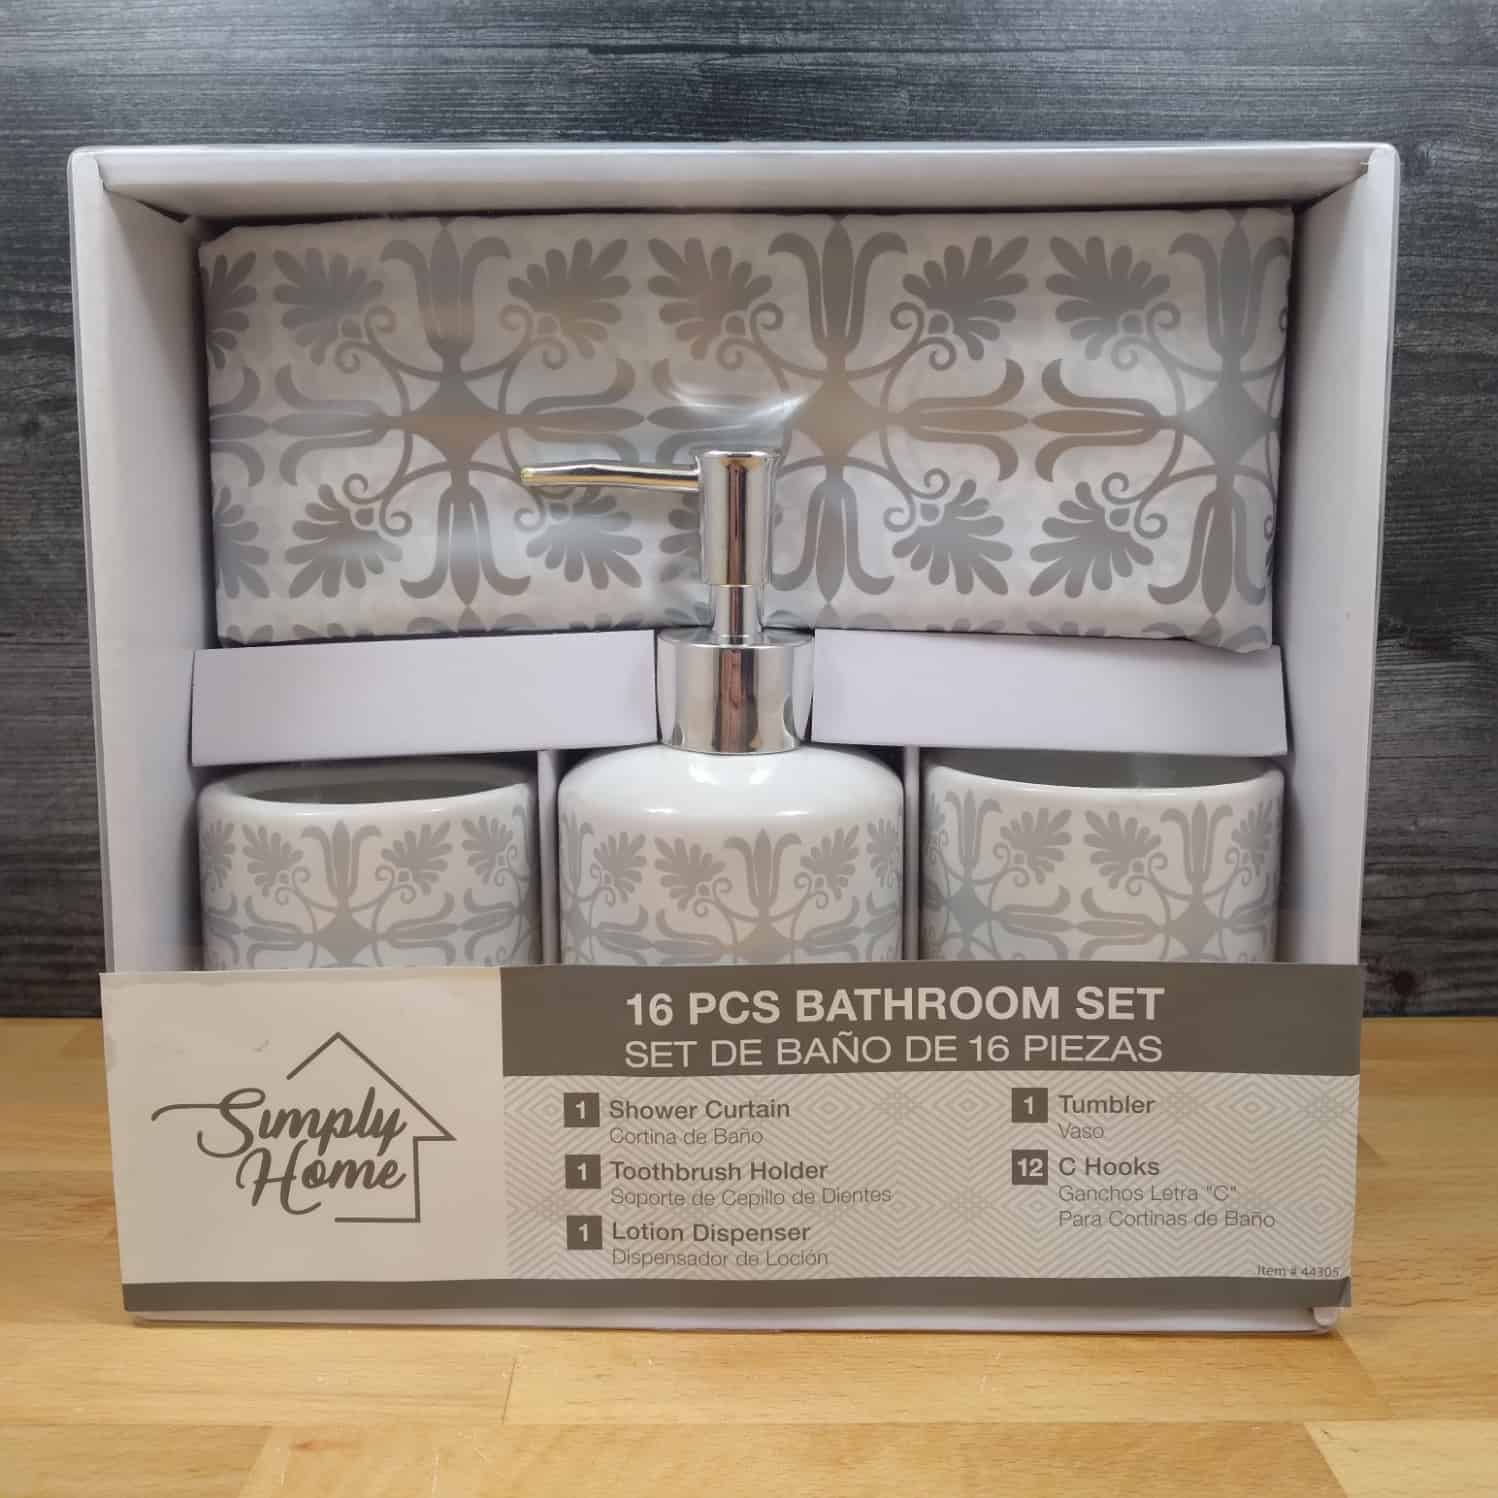 This Bathroom Set in White and Gray Toothbrush Holder Soap Dispenser Shower Curtain is made with love by Premier Homegoods! Shop more unique gift ideas today with Spots Initiatives, the best way to support creators.